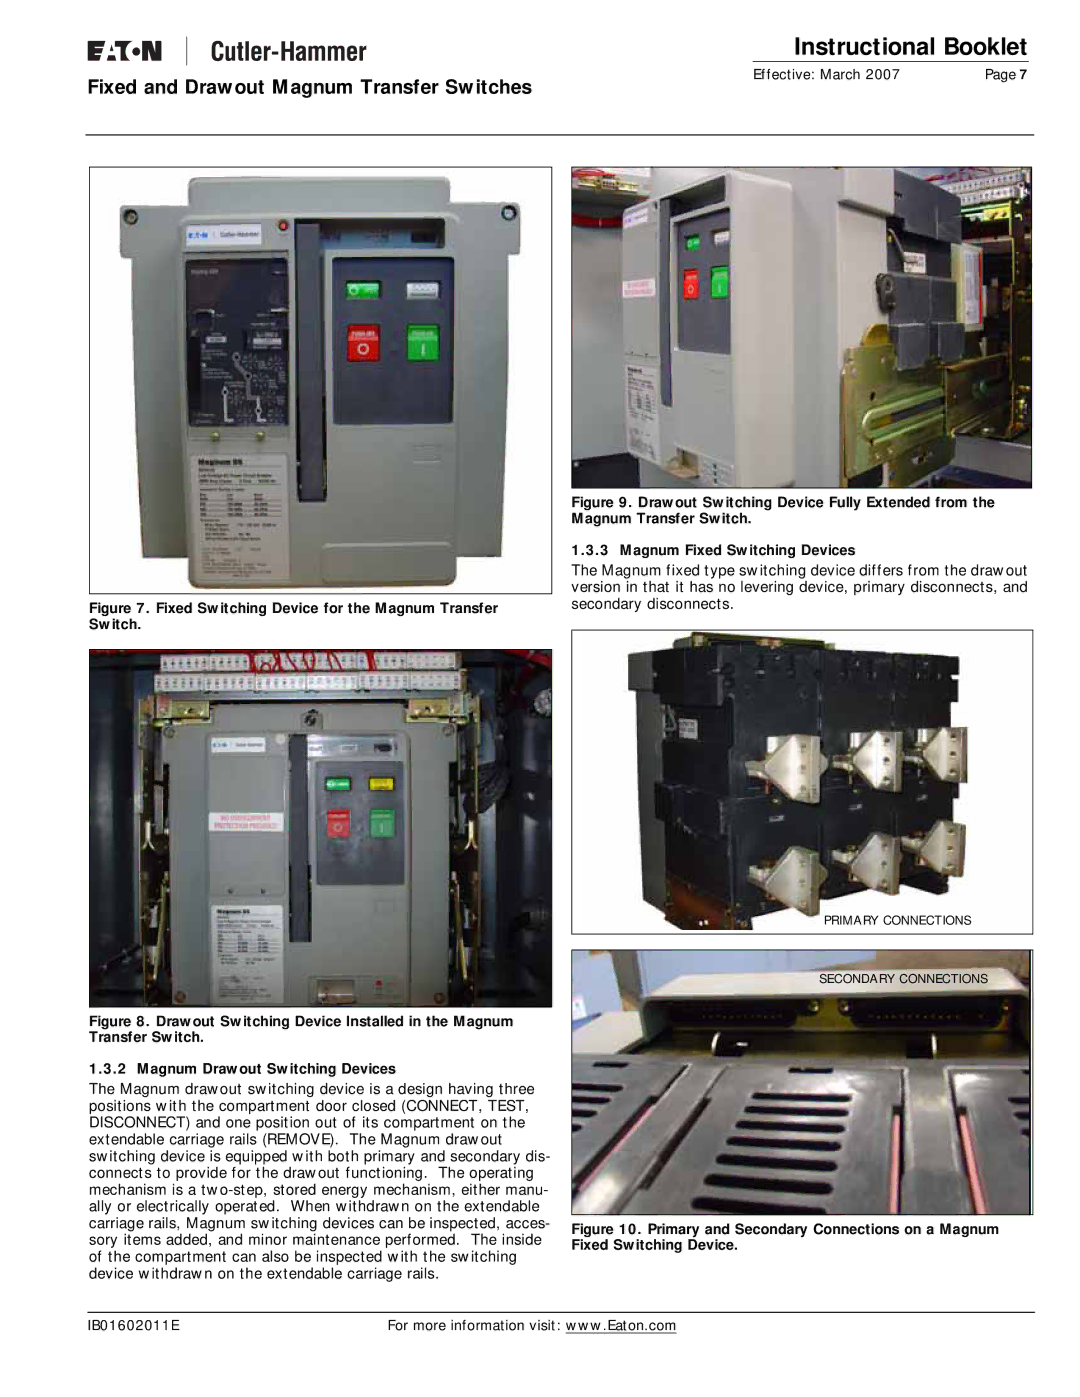 Eaton Electrical manual Fixed Switching Device for the Magnum Transfer Switch 